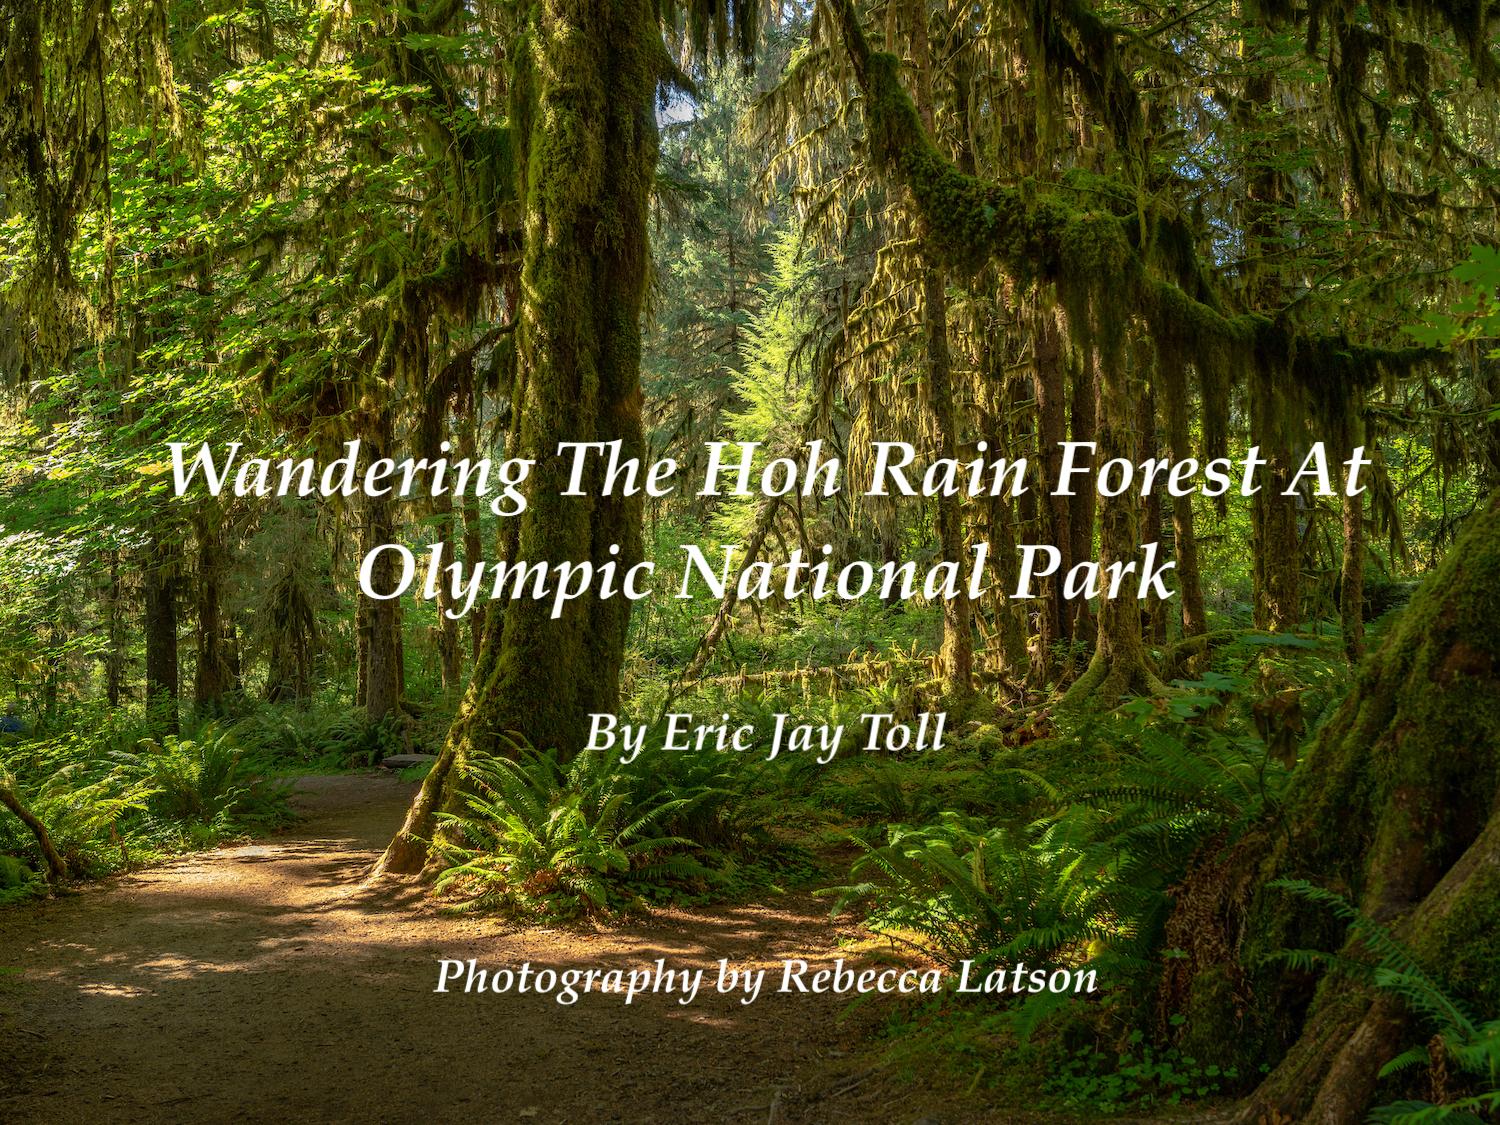 Wandering the Hoh Rain Forest at Olympic National Park